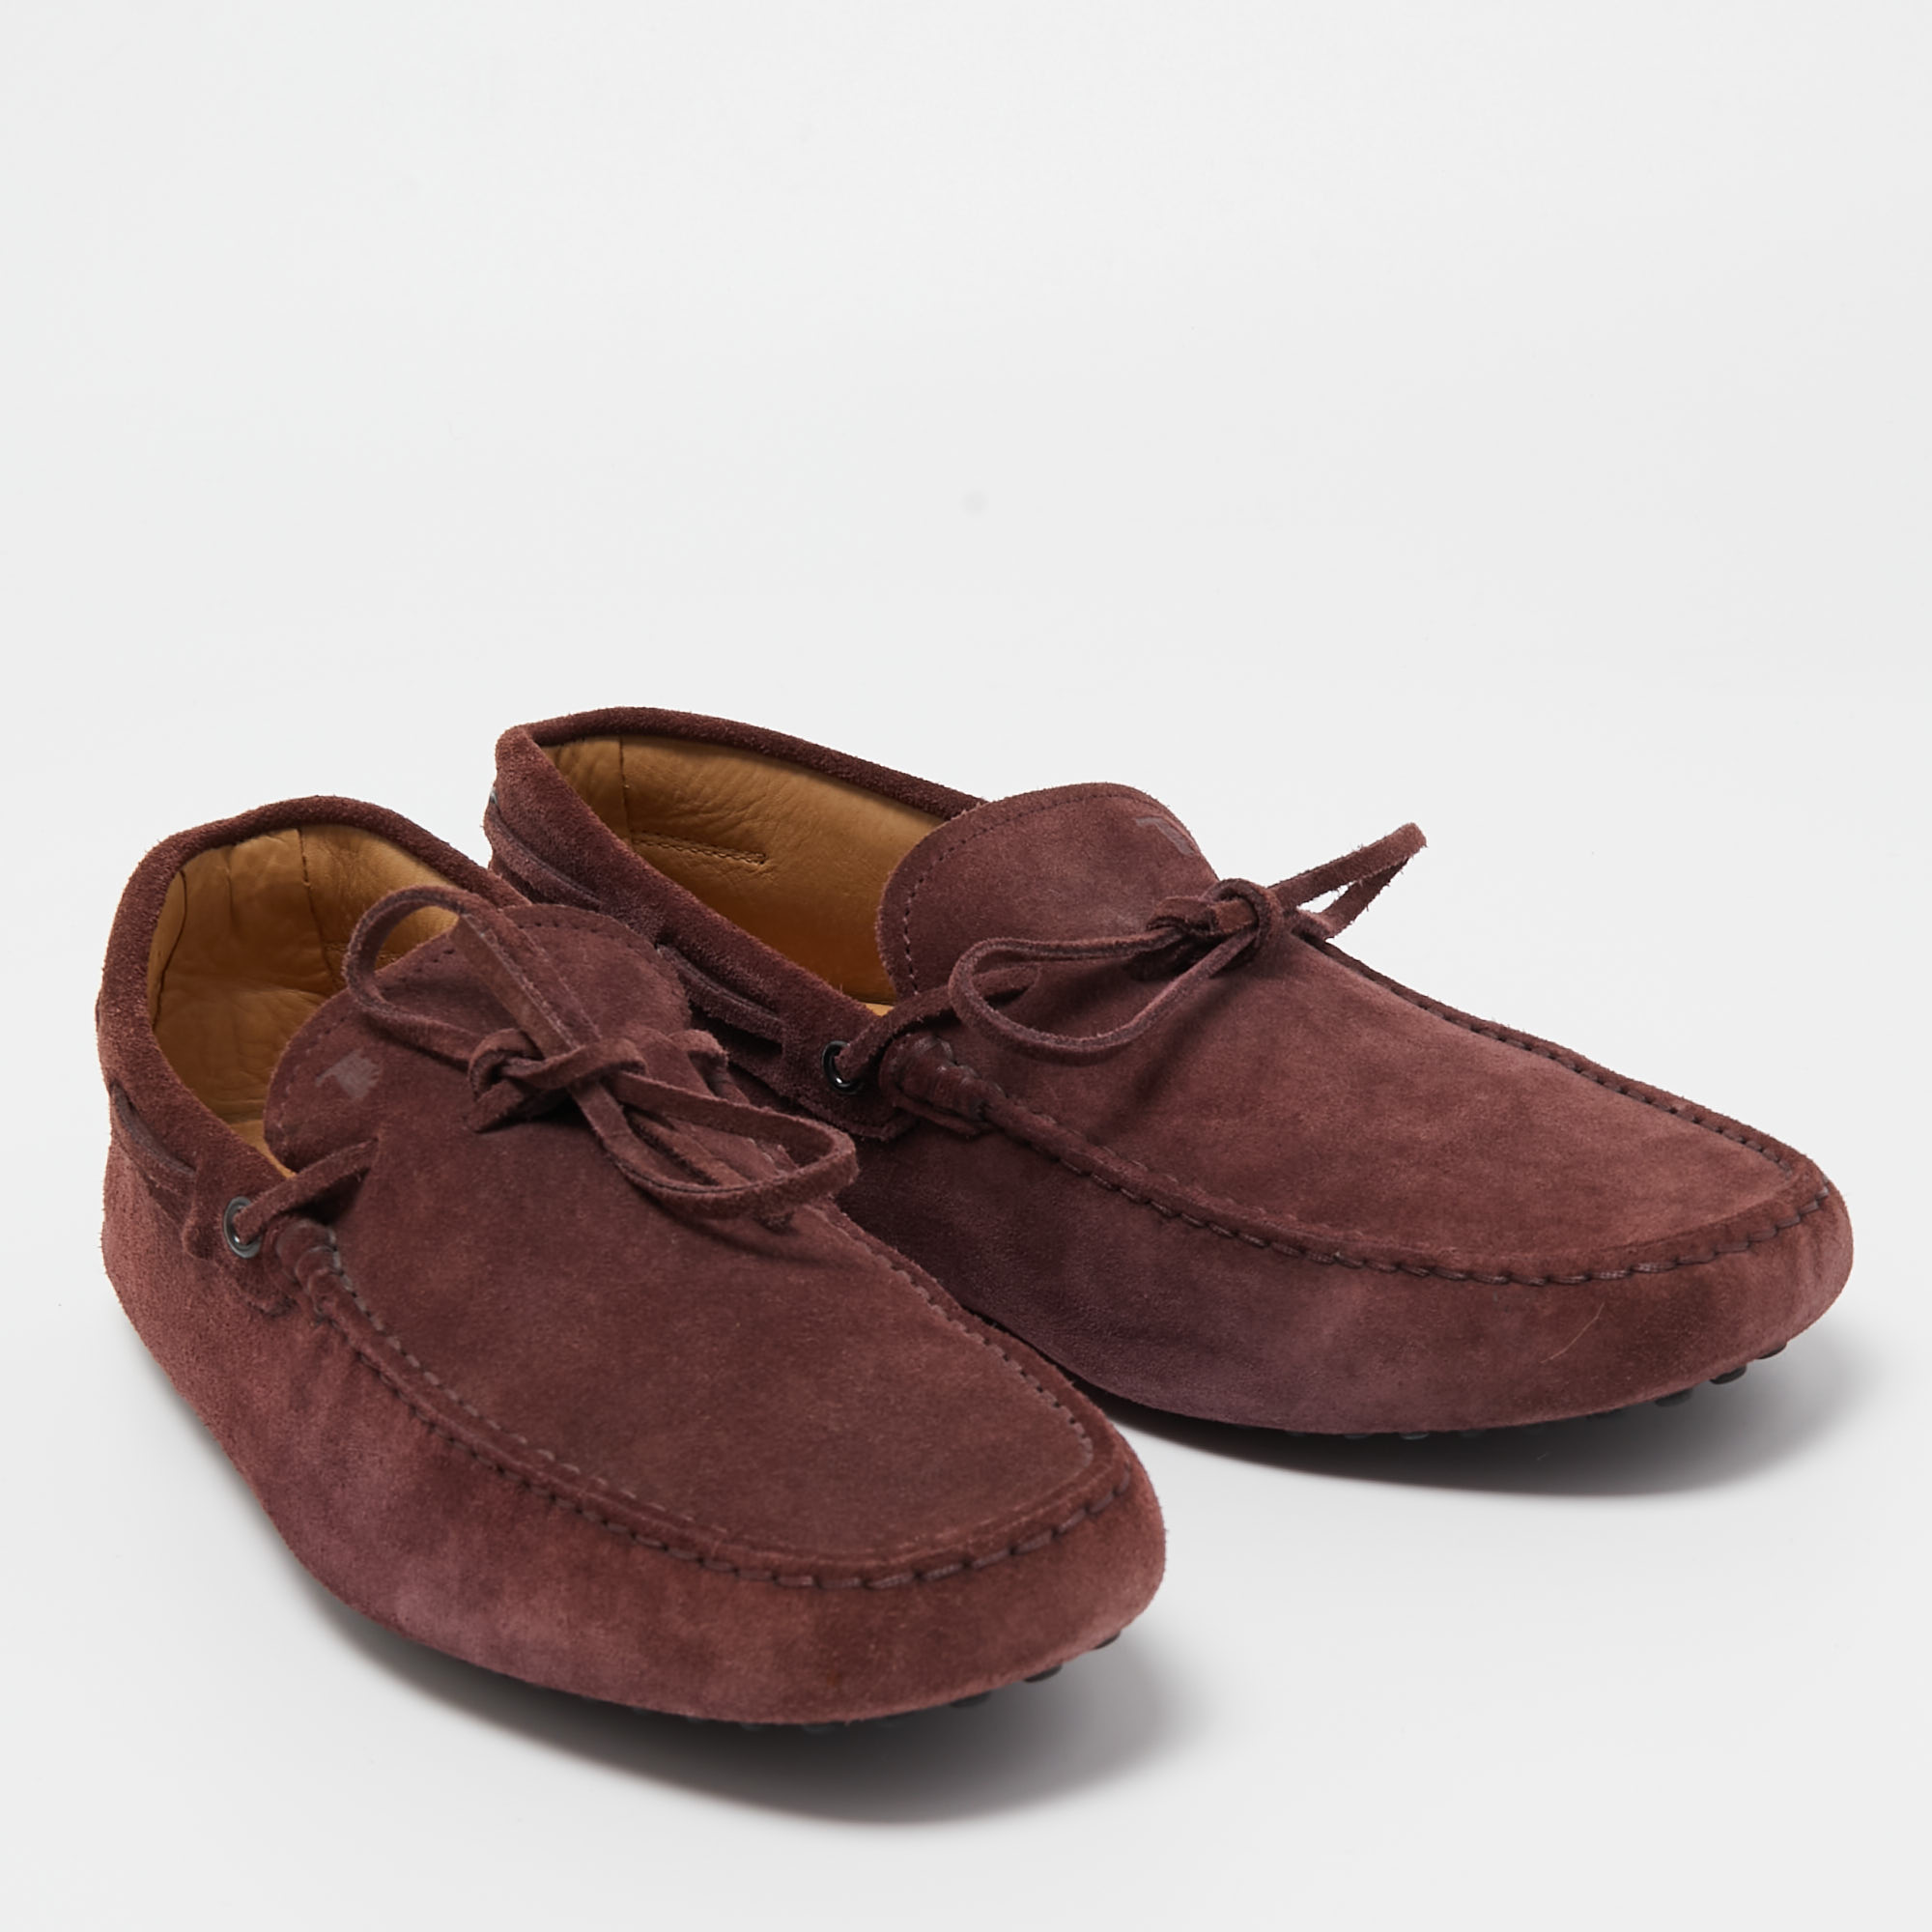 Tod's Burgundy Suede Bow Slip On Loafers Size 44